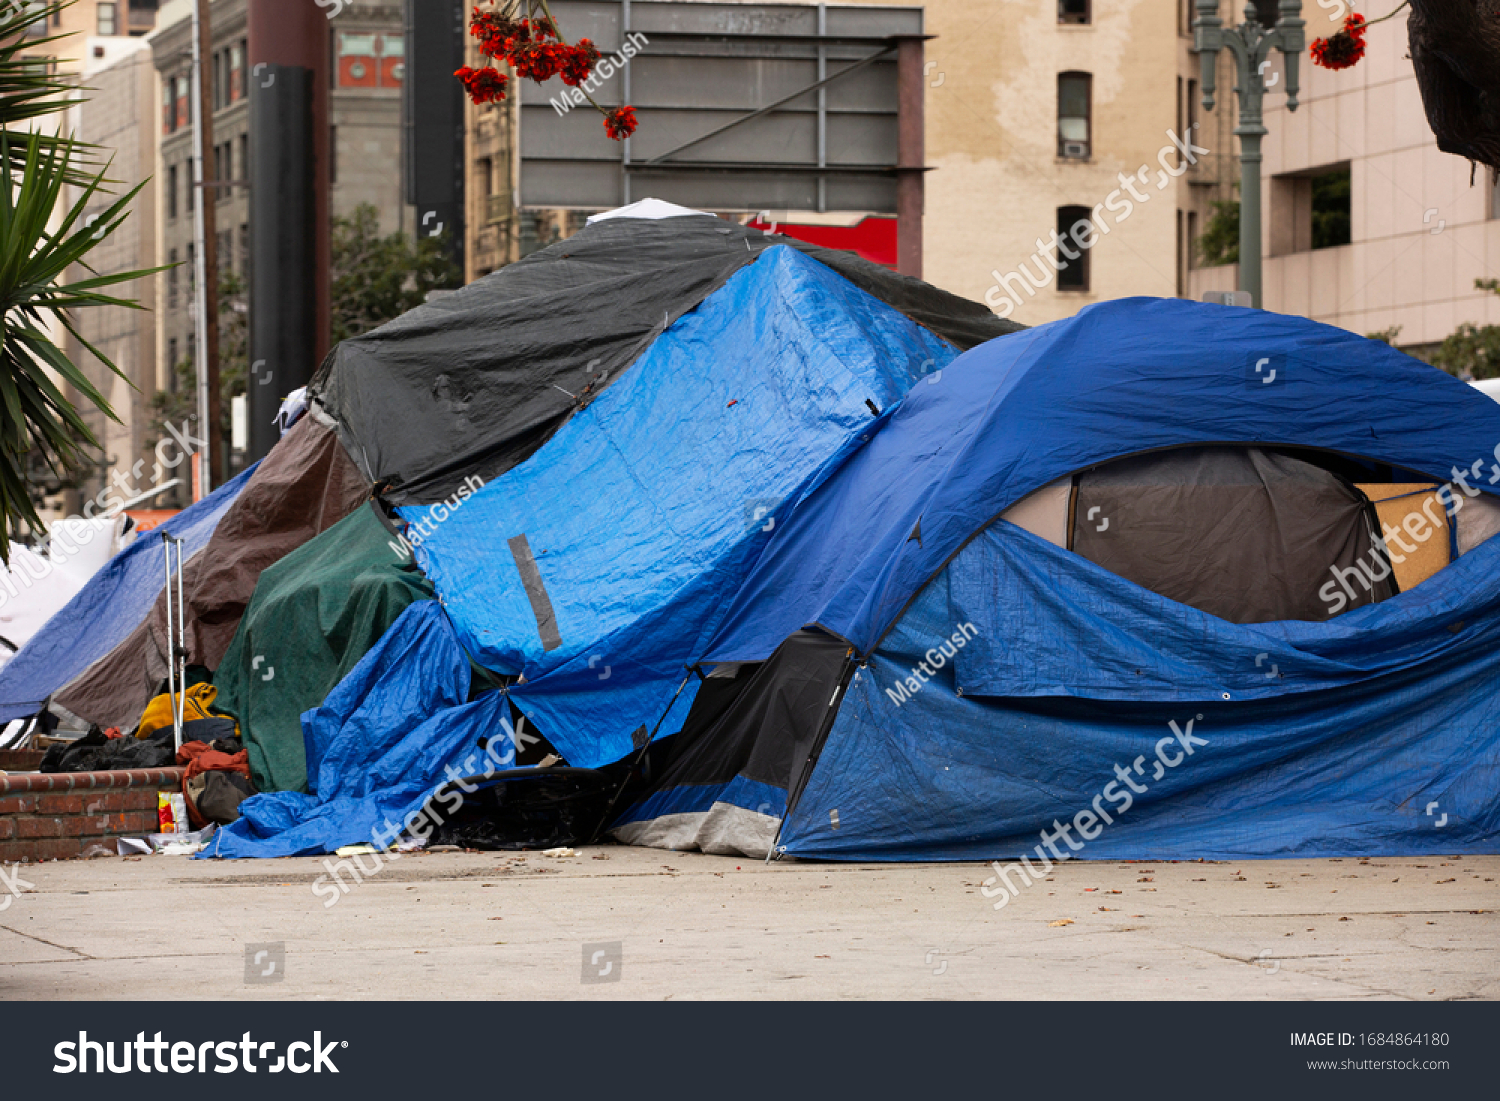 A homeless encampment on the streets of Downtown Los Angeles. #1684864180